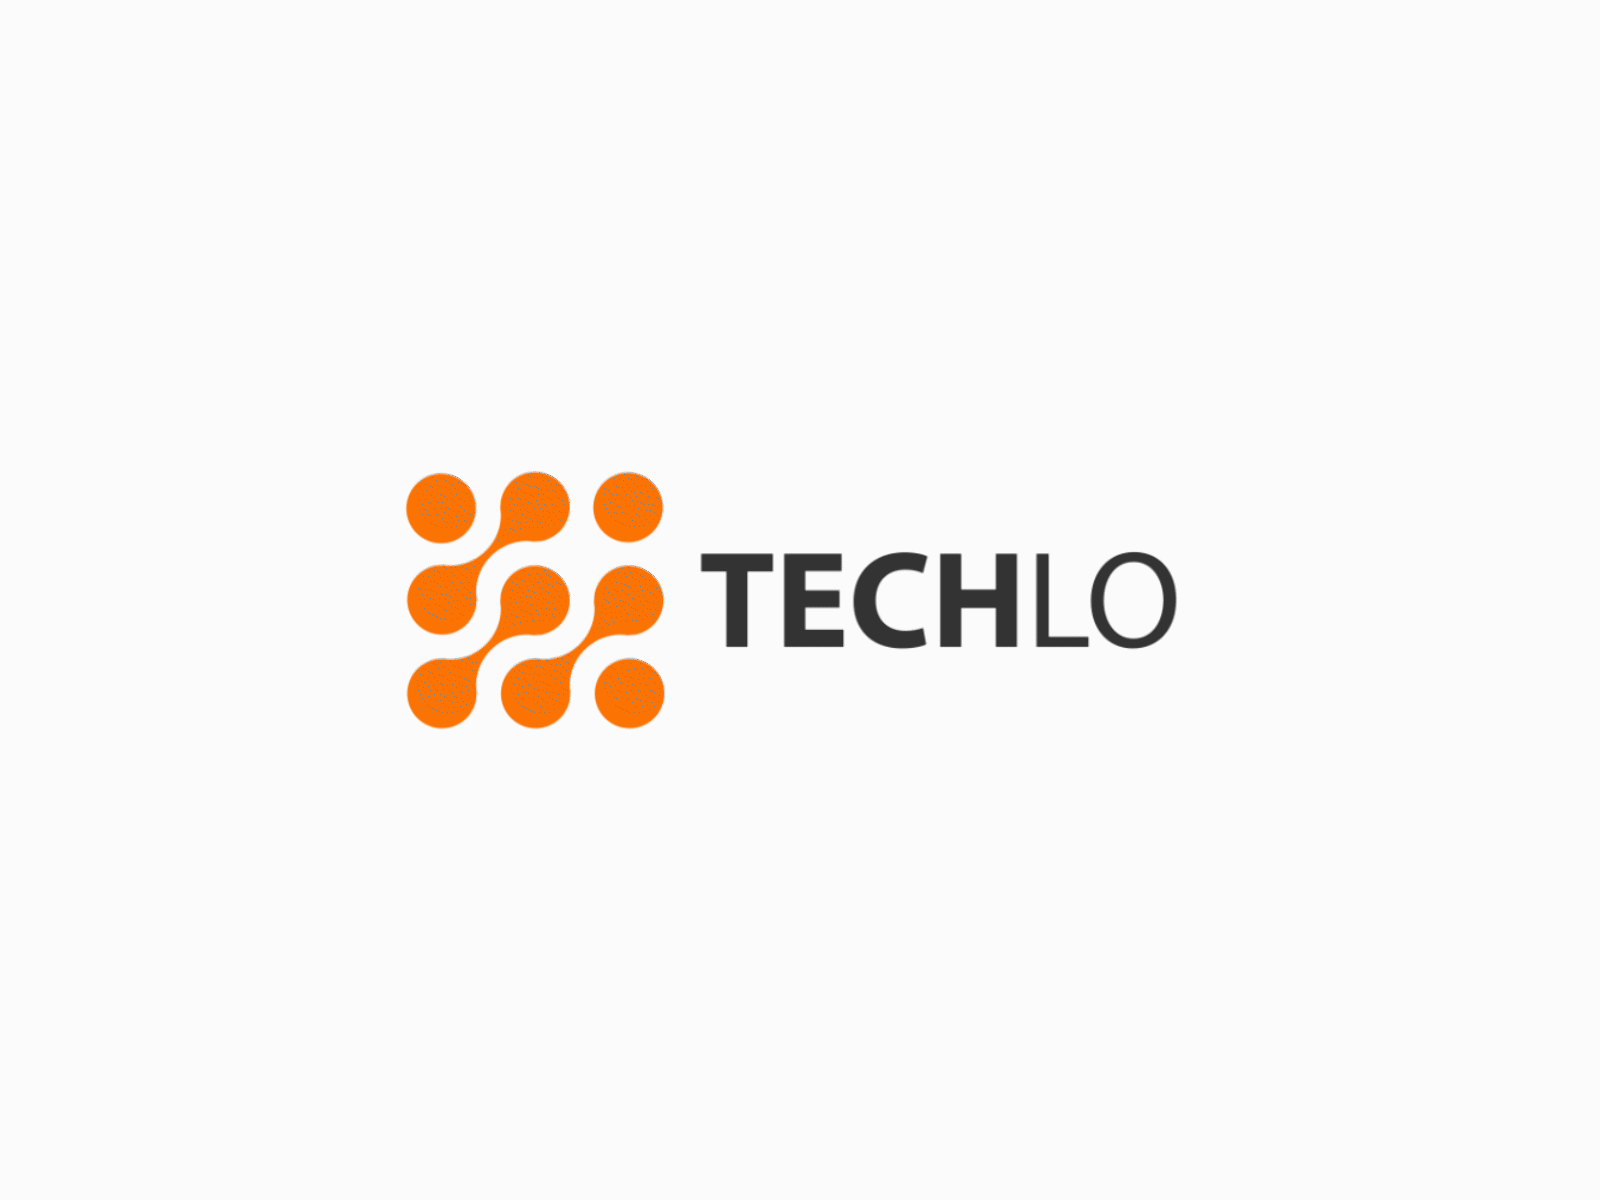 Techlo logo animation 2d 2d animation 3d after effect animation animation branding character animation custom animation custom logo animation design graphic design illustration illustrator logo logo animation logo branding logo design logo fix motion graphics